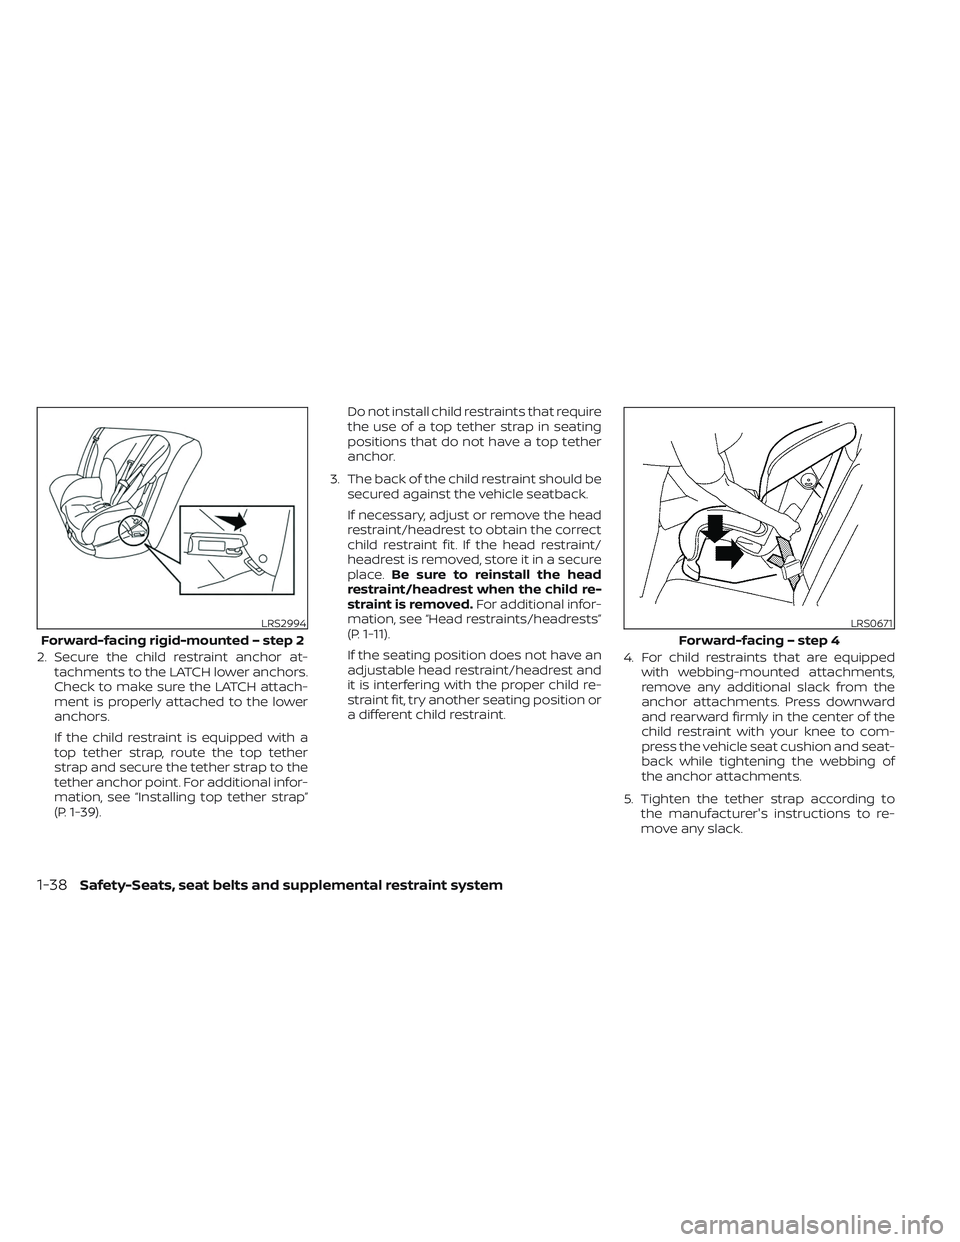 NISSAN TITAN 2022  Owners Manual 2. Secure the child restraint anchor at-tachments to the LATCH lower anchors.
Check to make sure the LATCH attach-
ment is properly attached to the lower
anchors.
If the child restraint is equipped wi